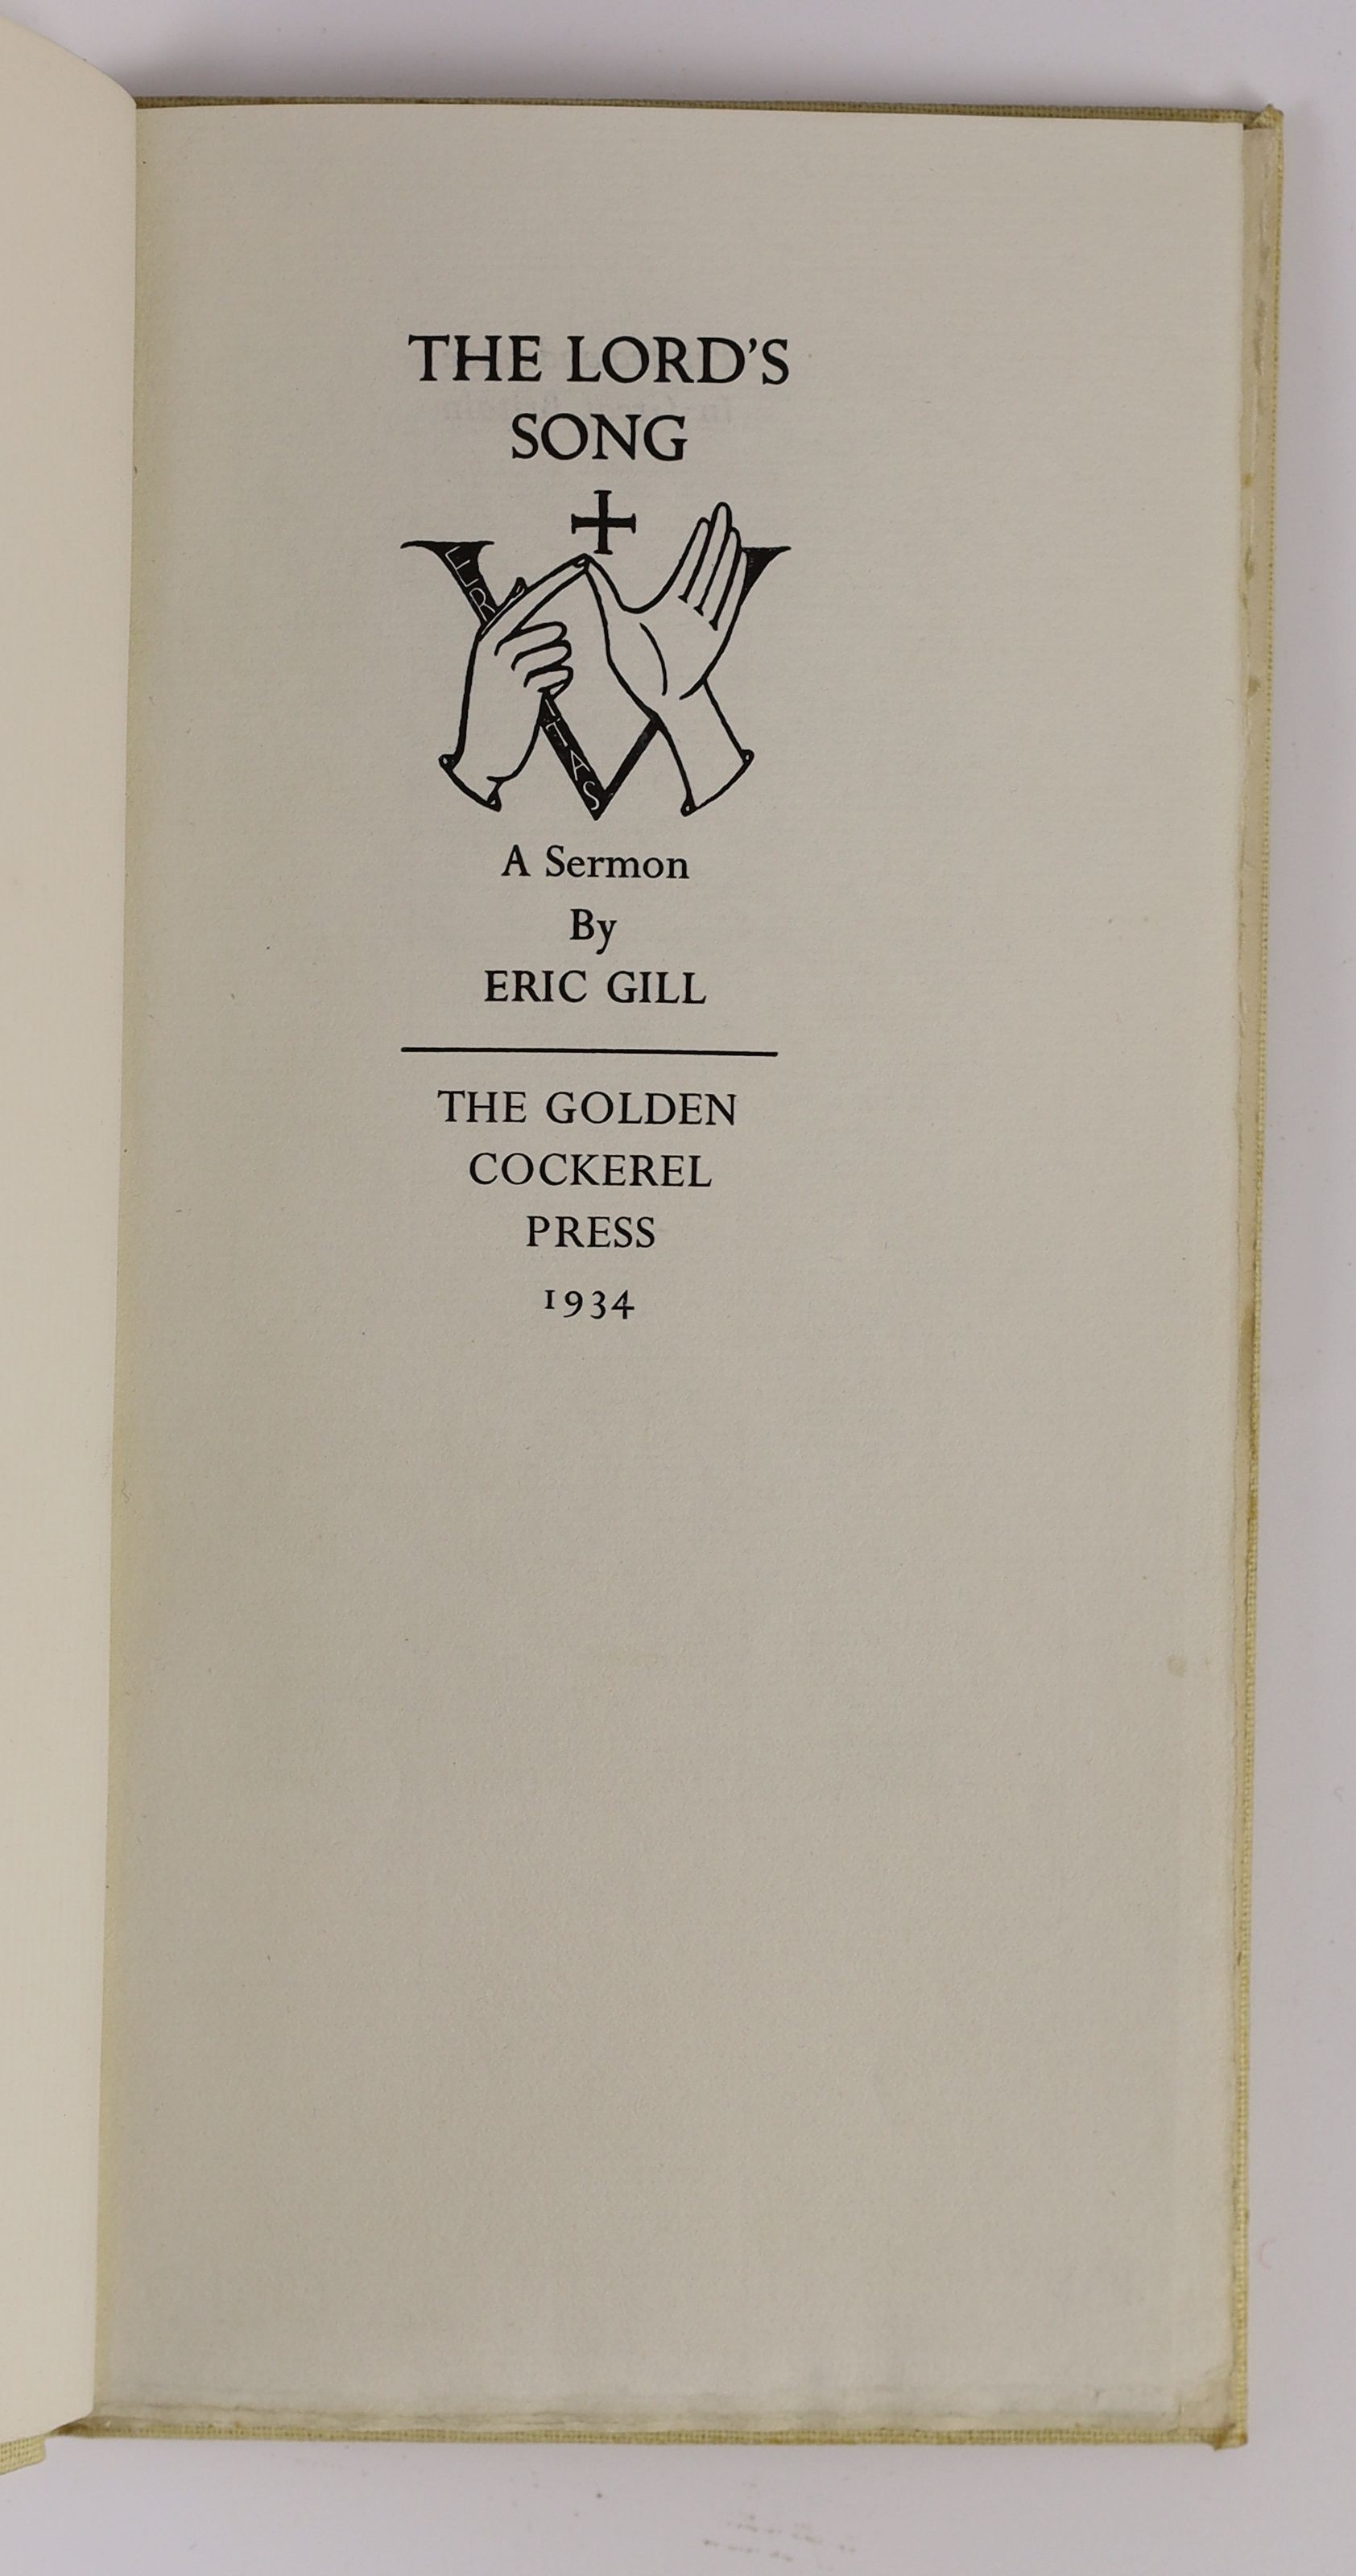 Golden Cockerel Press - Gill, Eric - The Lord’s Song. A Sermon, one of 500, cream buckram, with gilt monograms GCP, with two wood-engravings, Waltham Saint Lawrence, 1934